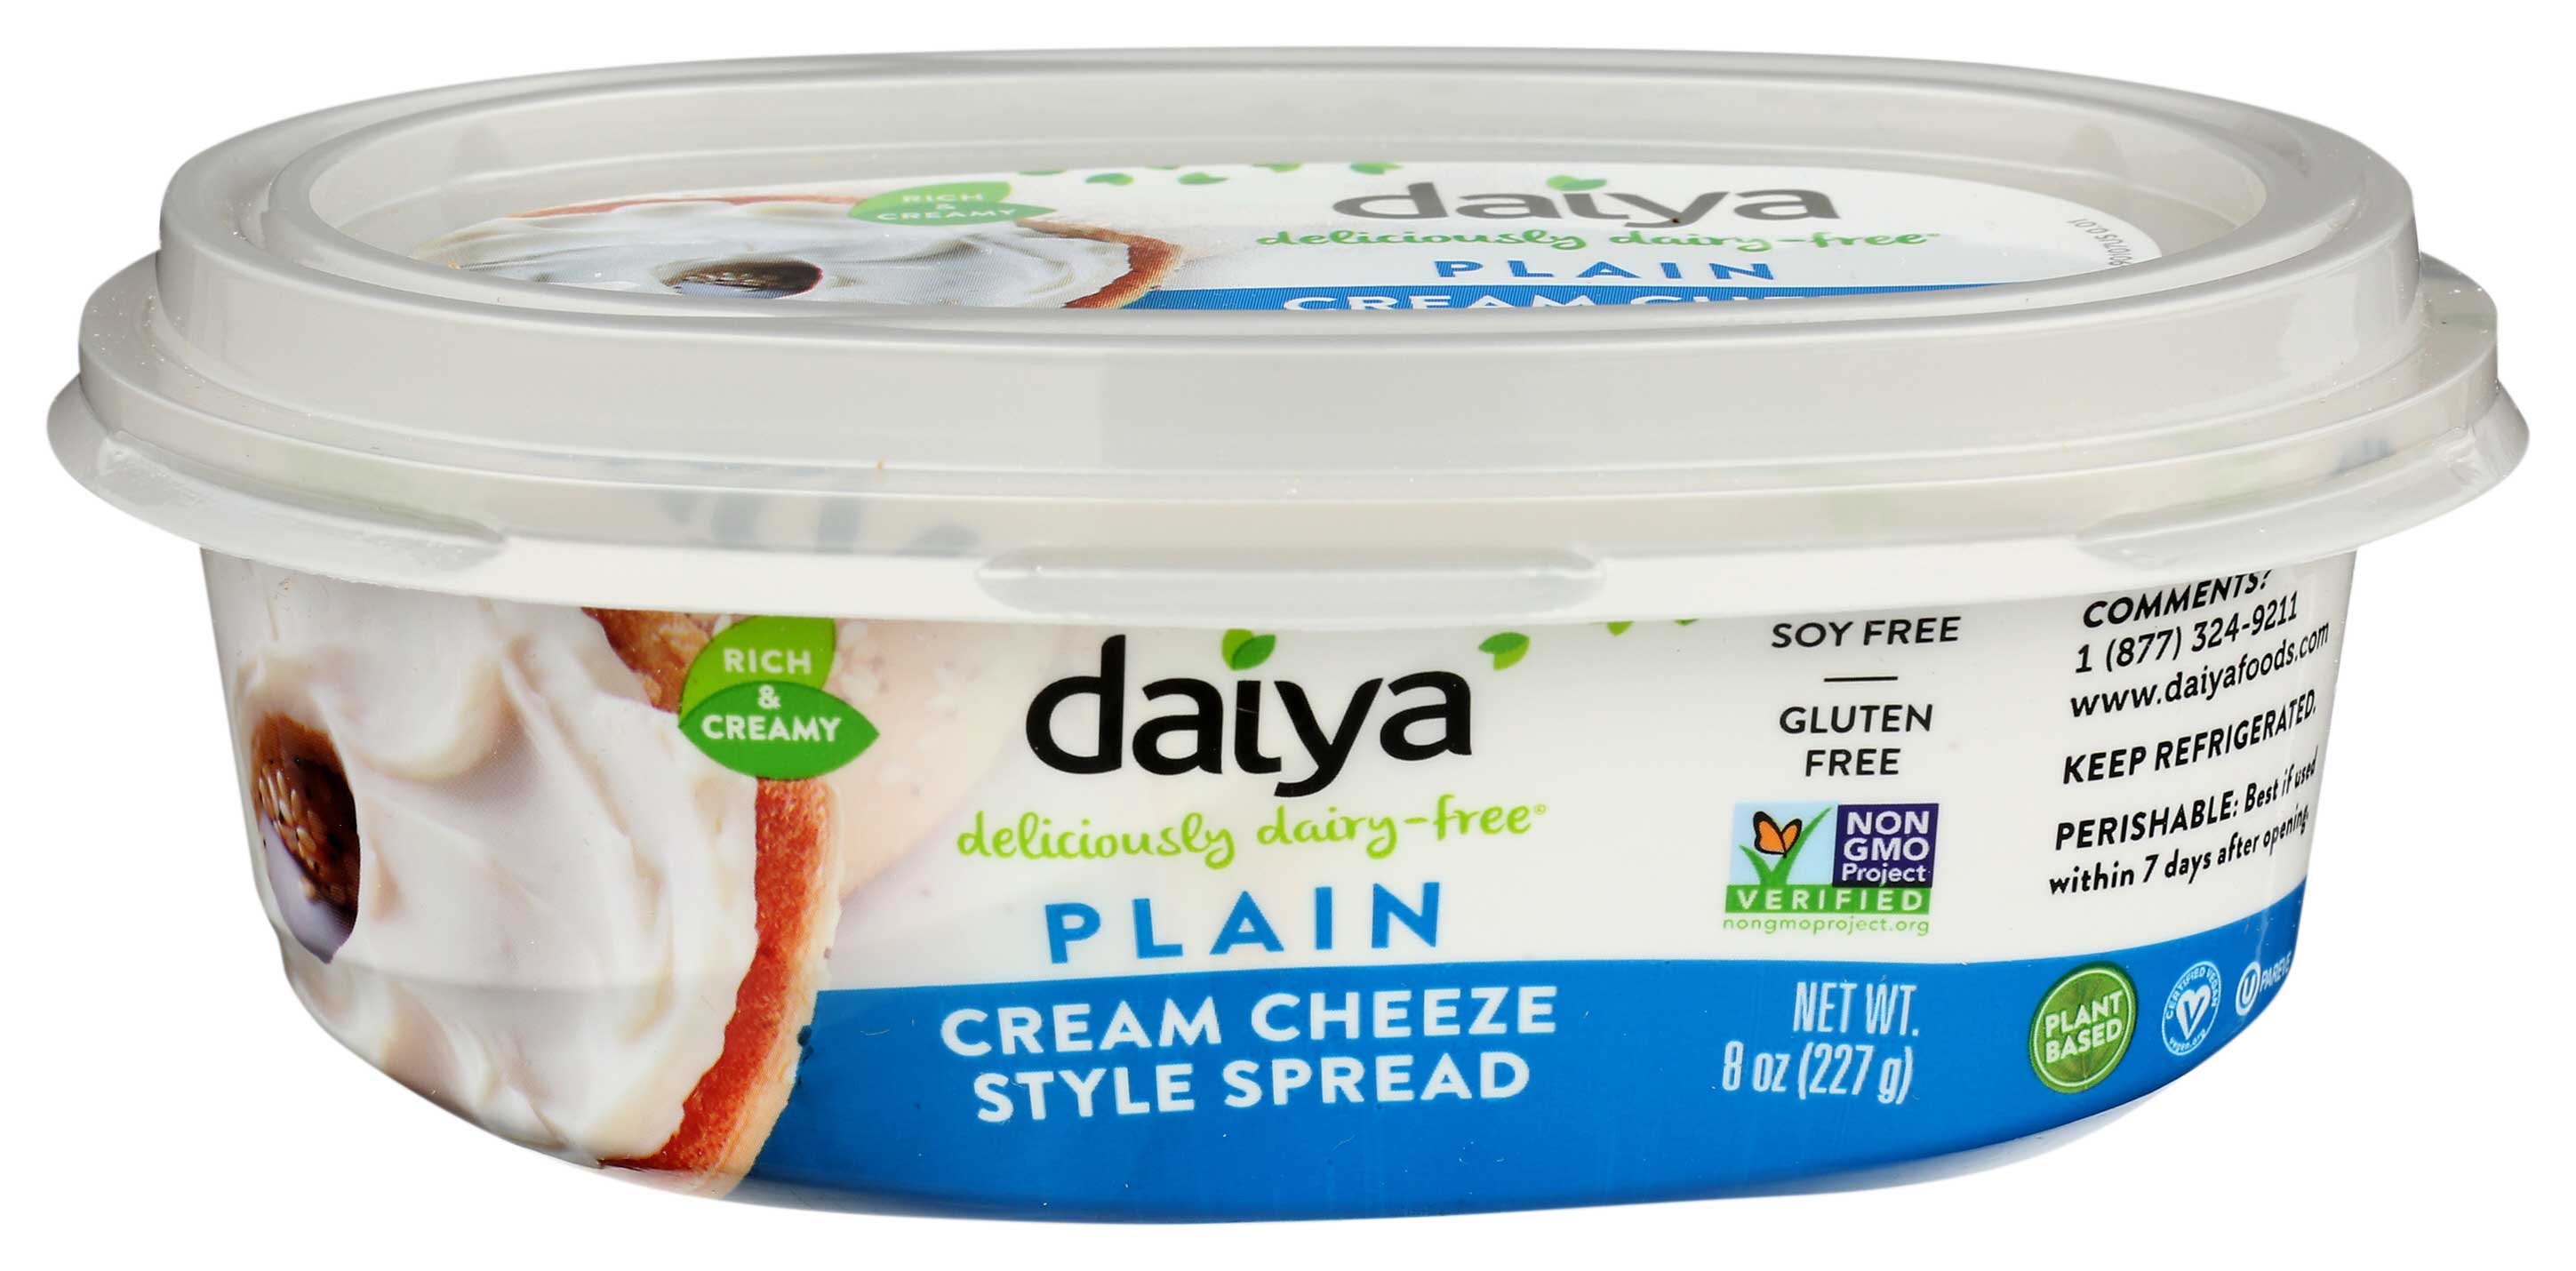 Daiya Deliciously Dairy Free Plain Cream Cheeze Style Spread 8 Ounce 6 Per Case 